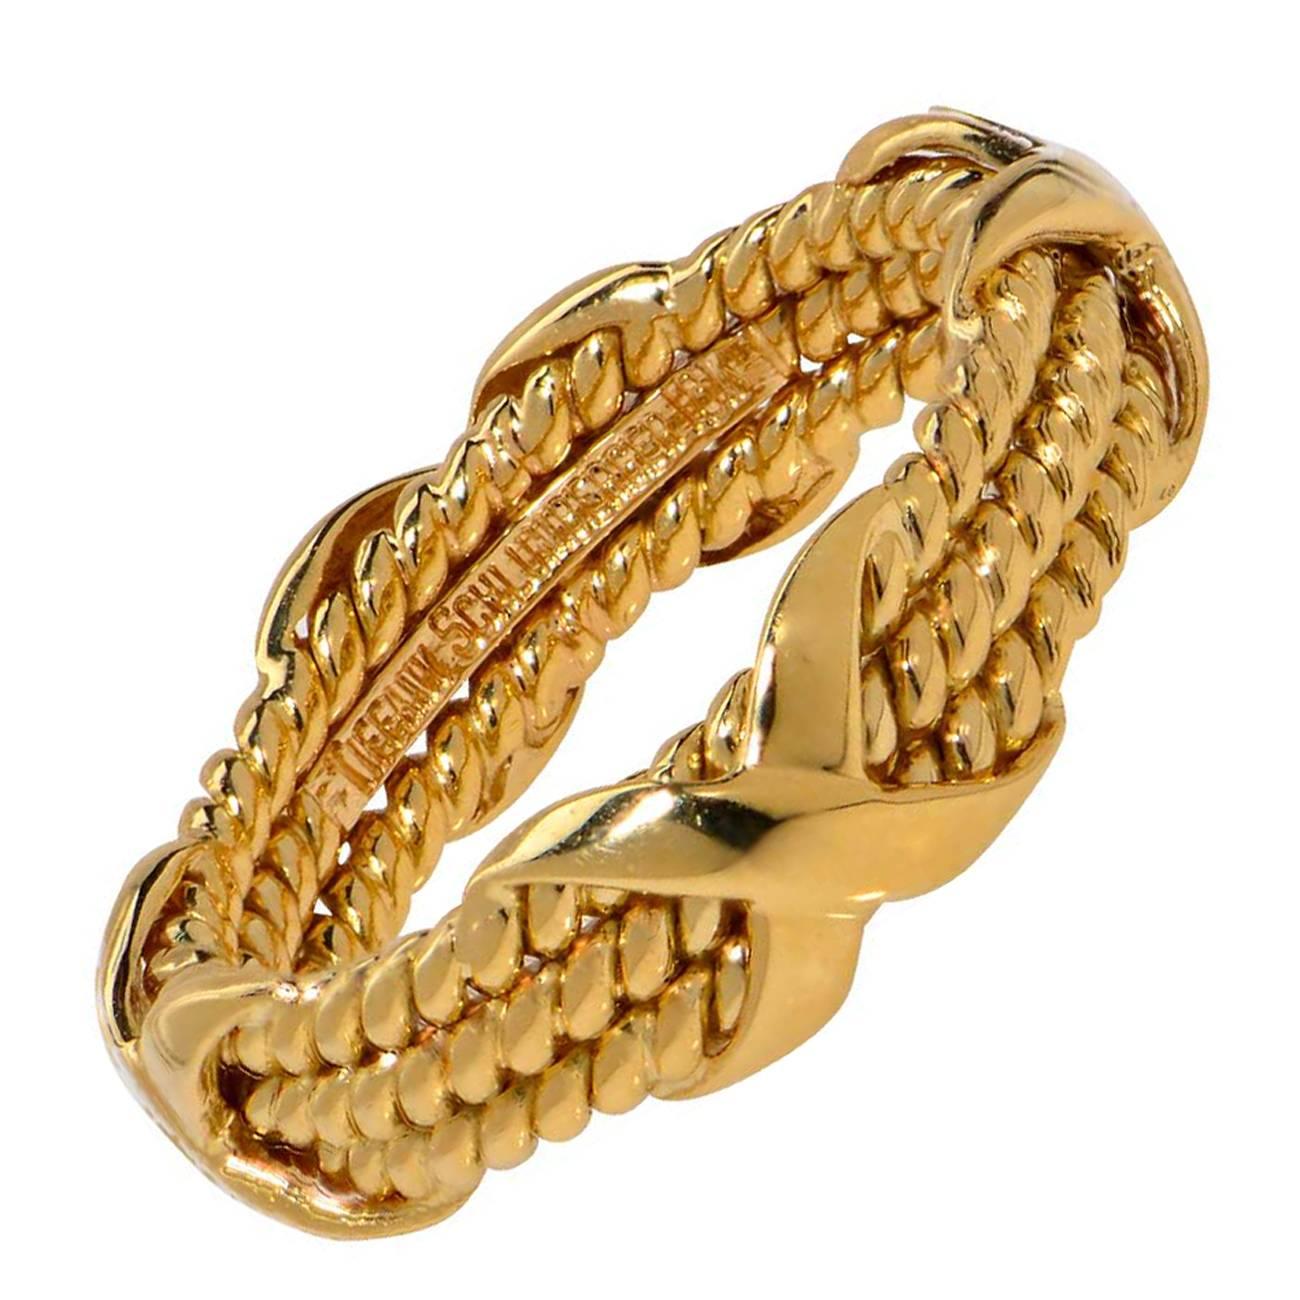 Tiffany & Co. Schlumberger gold band ring